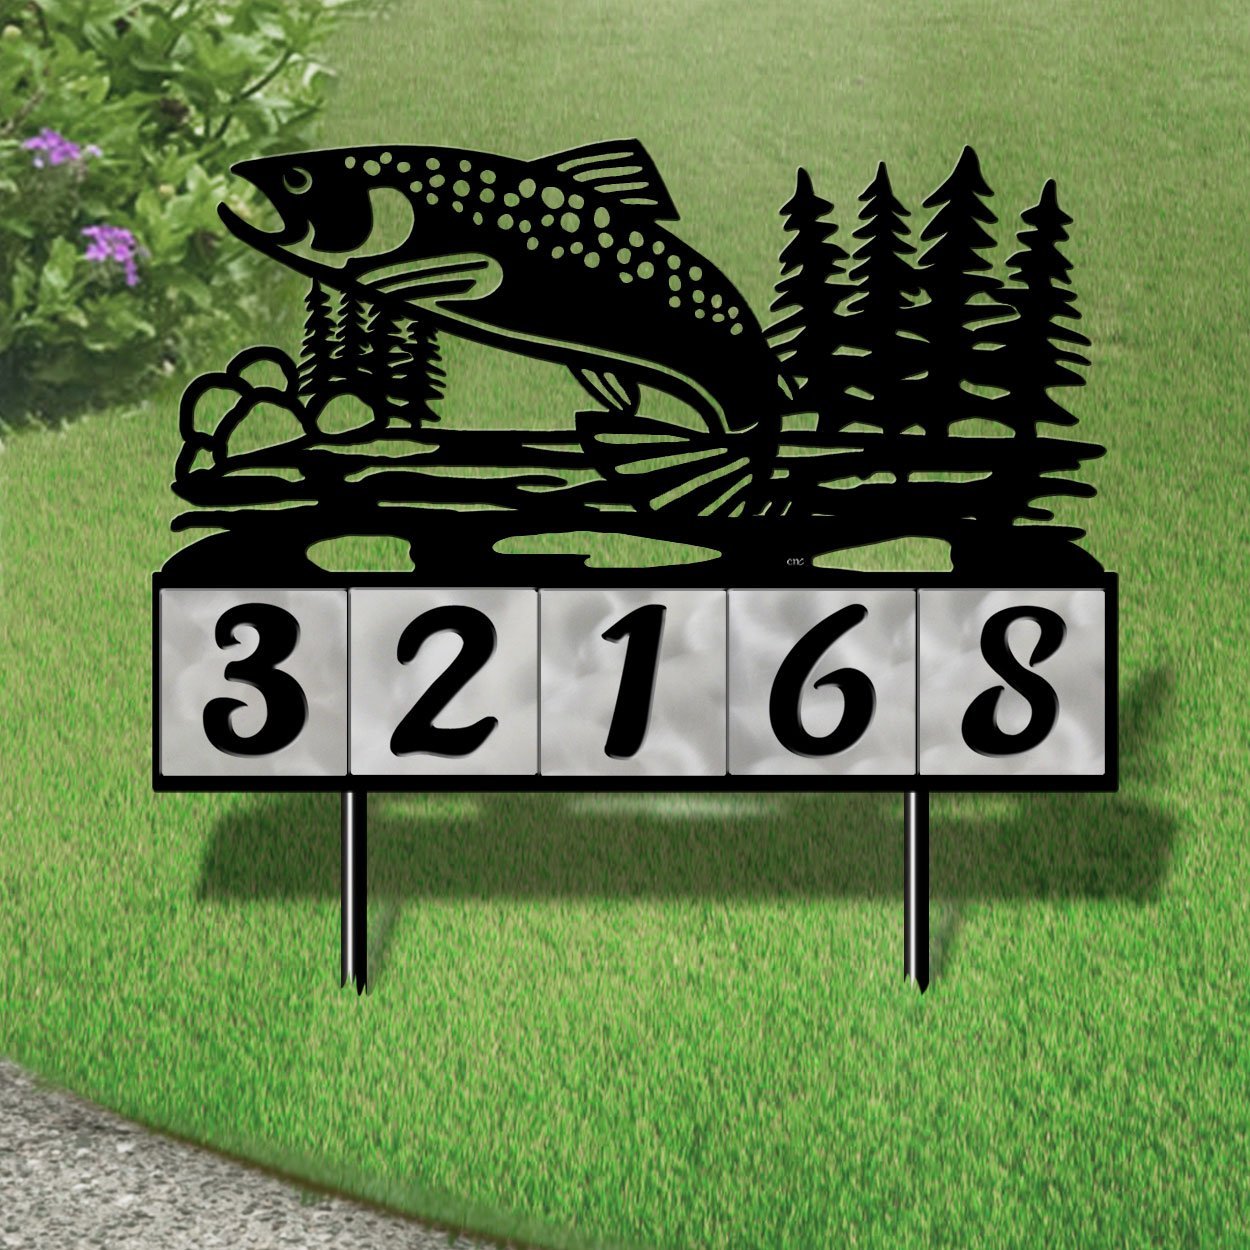 610255 - Jumping Trout in Stream Design 5-Digit Horizontal 6-inch Tile Outdoor House Numbers Yard Sign